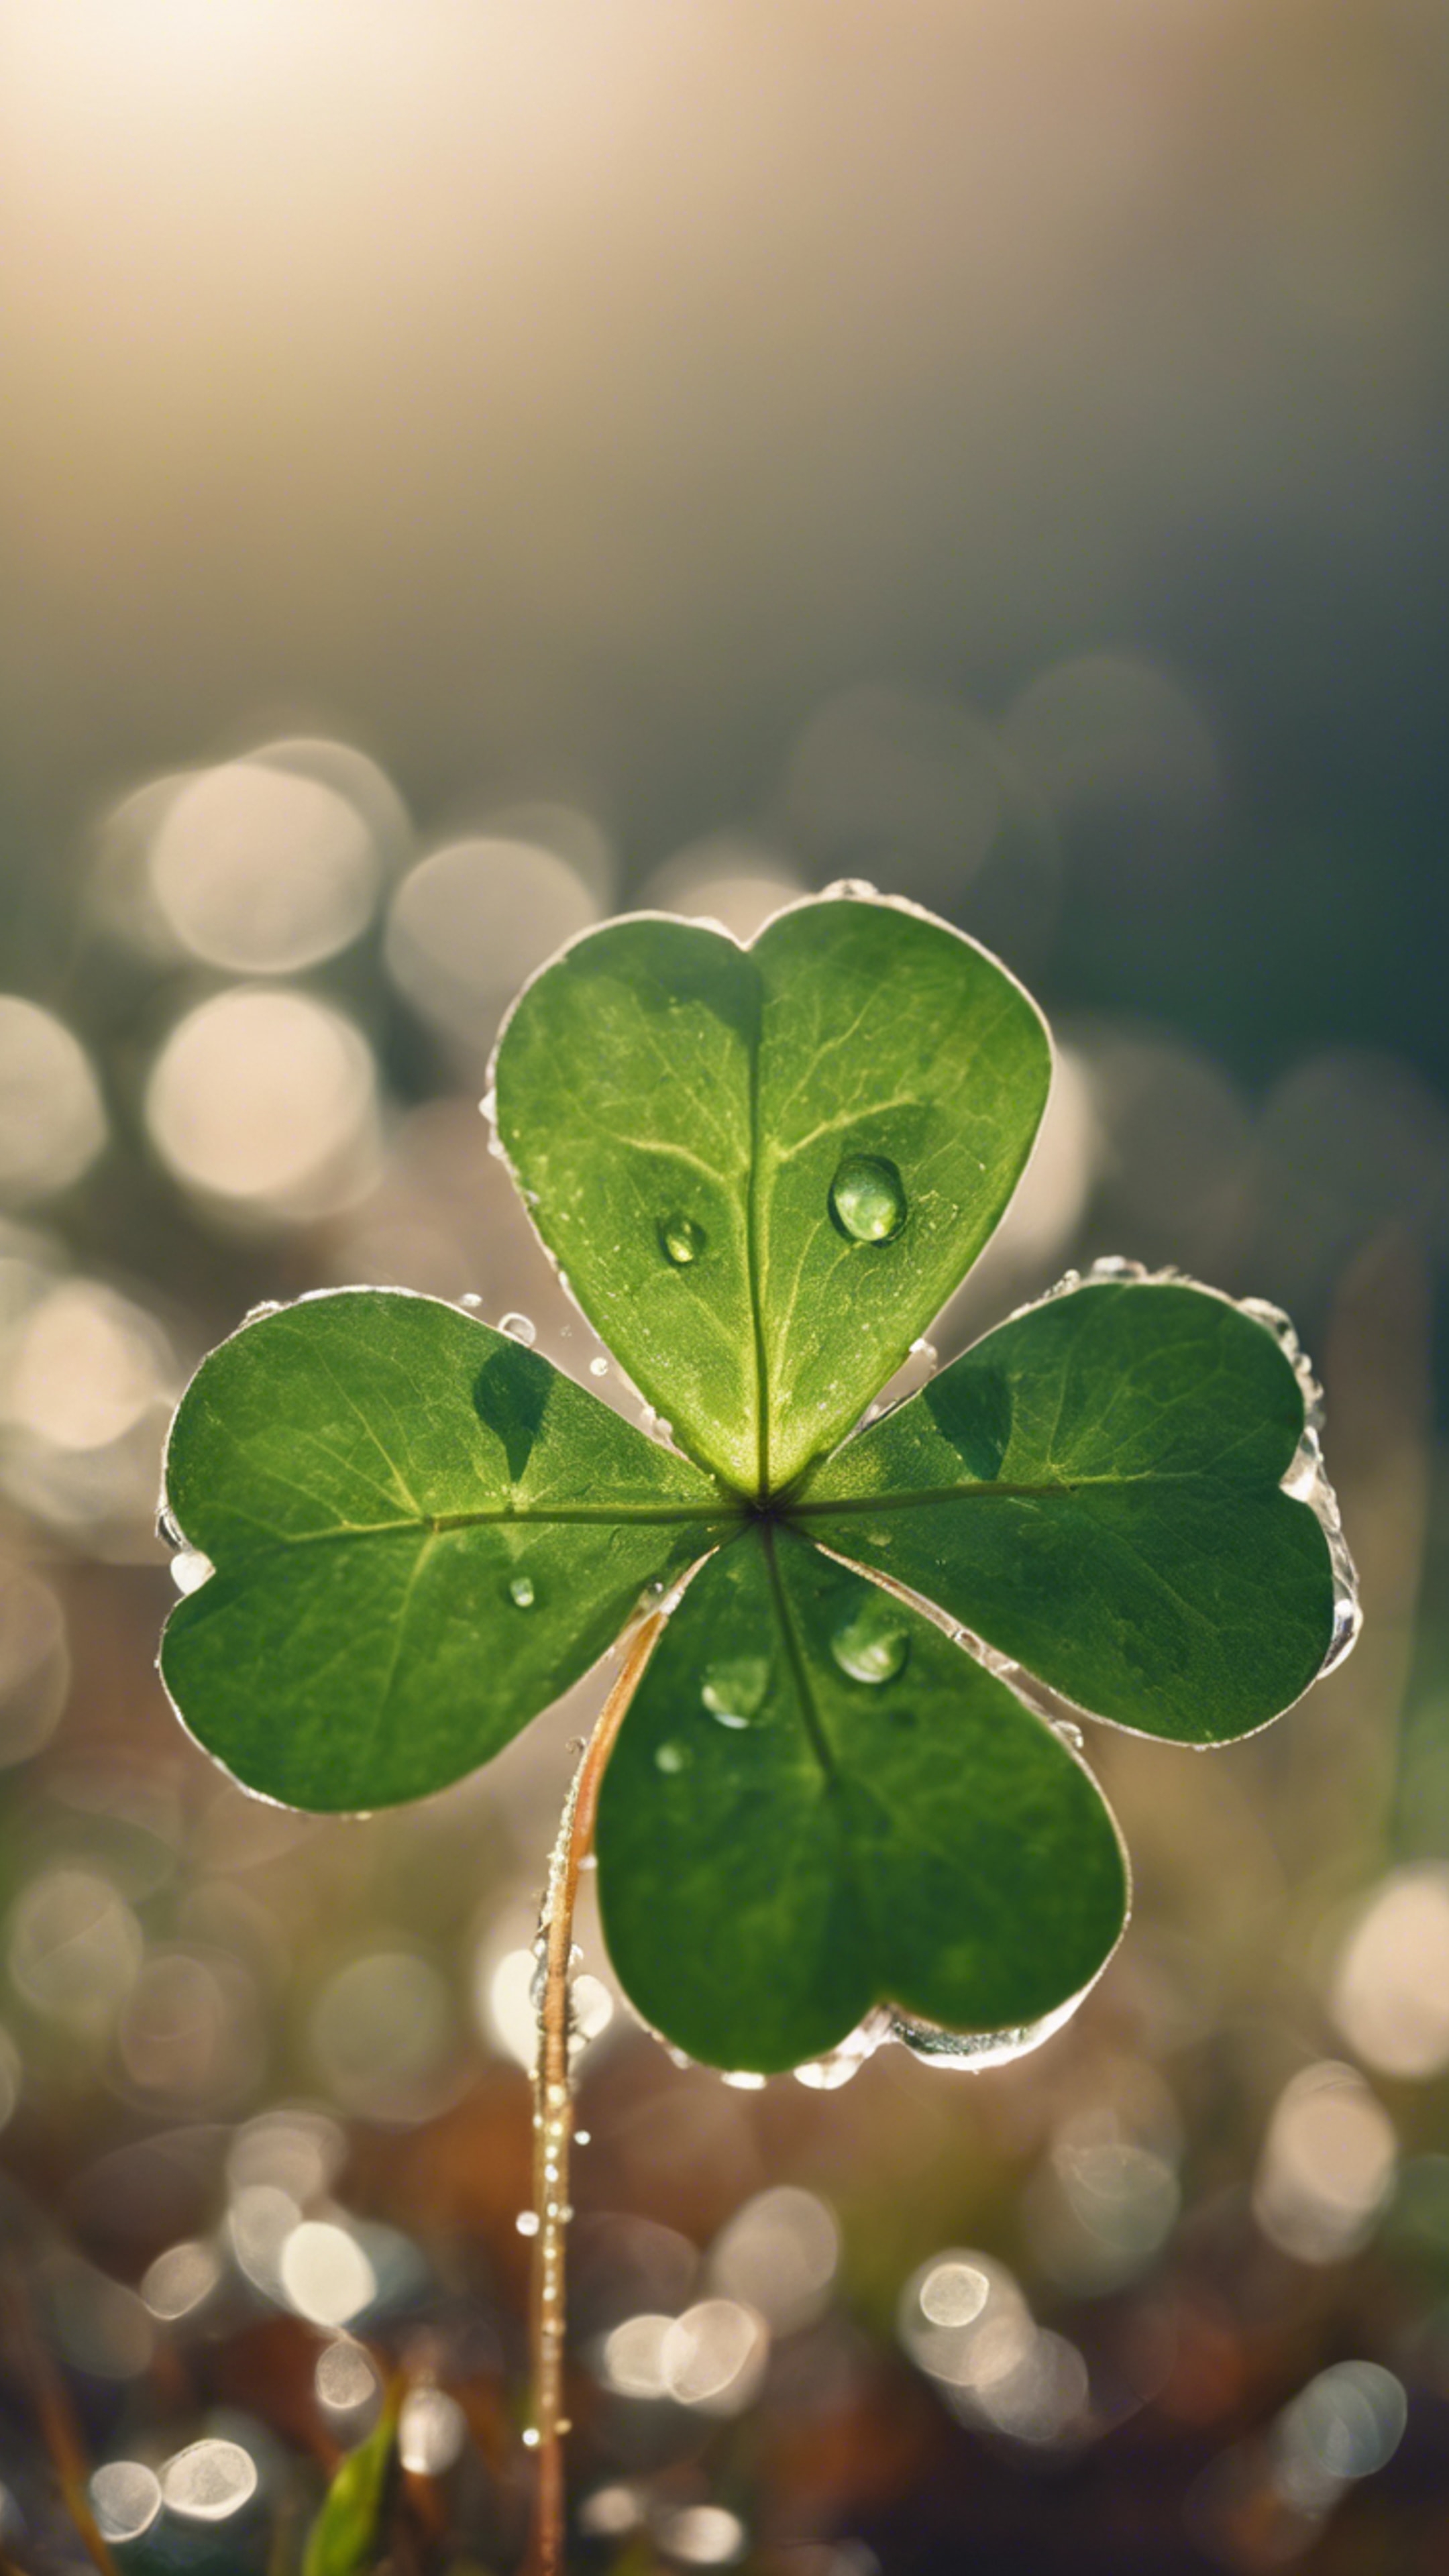 A close-up view of a four leaf clover gleaming in the morning dew. Tapeta[b8d84a1222284df192e8]